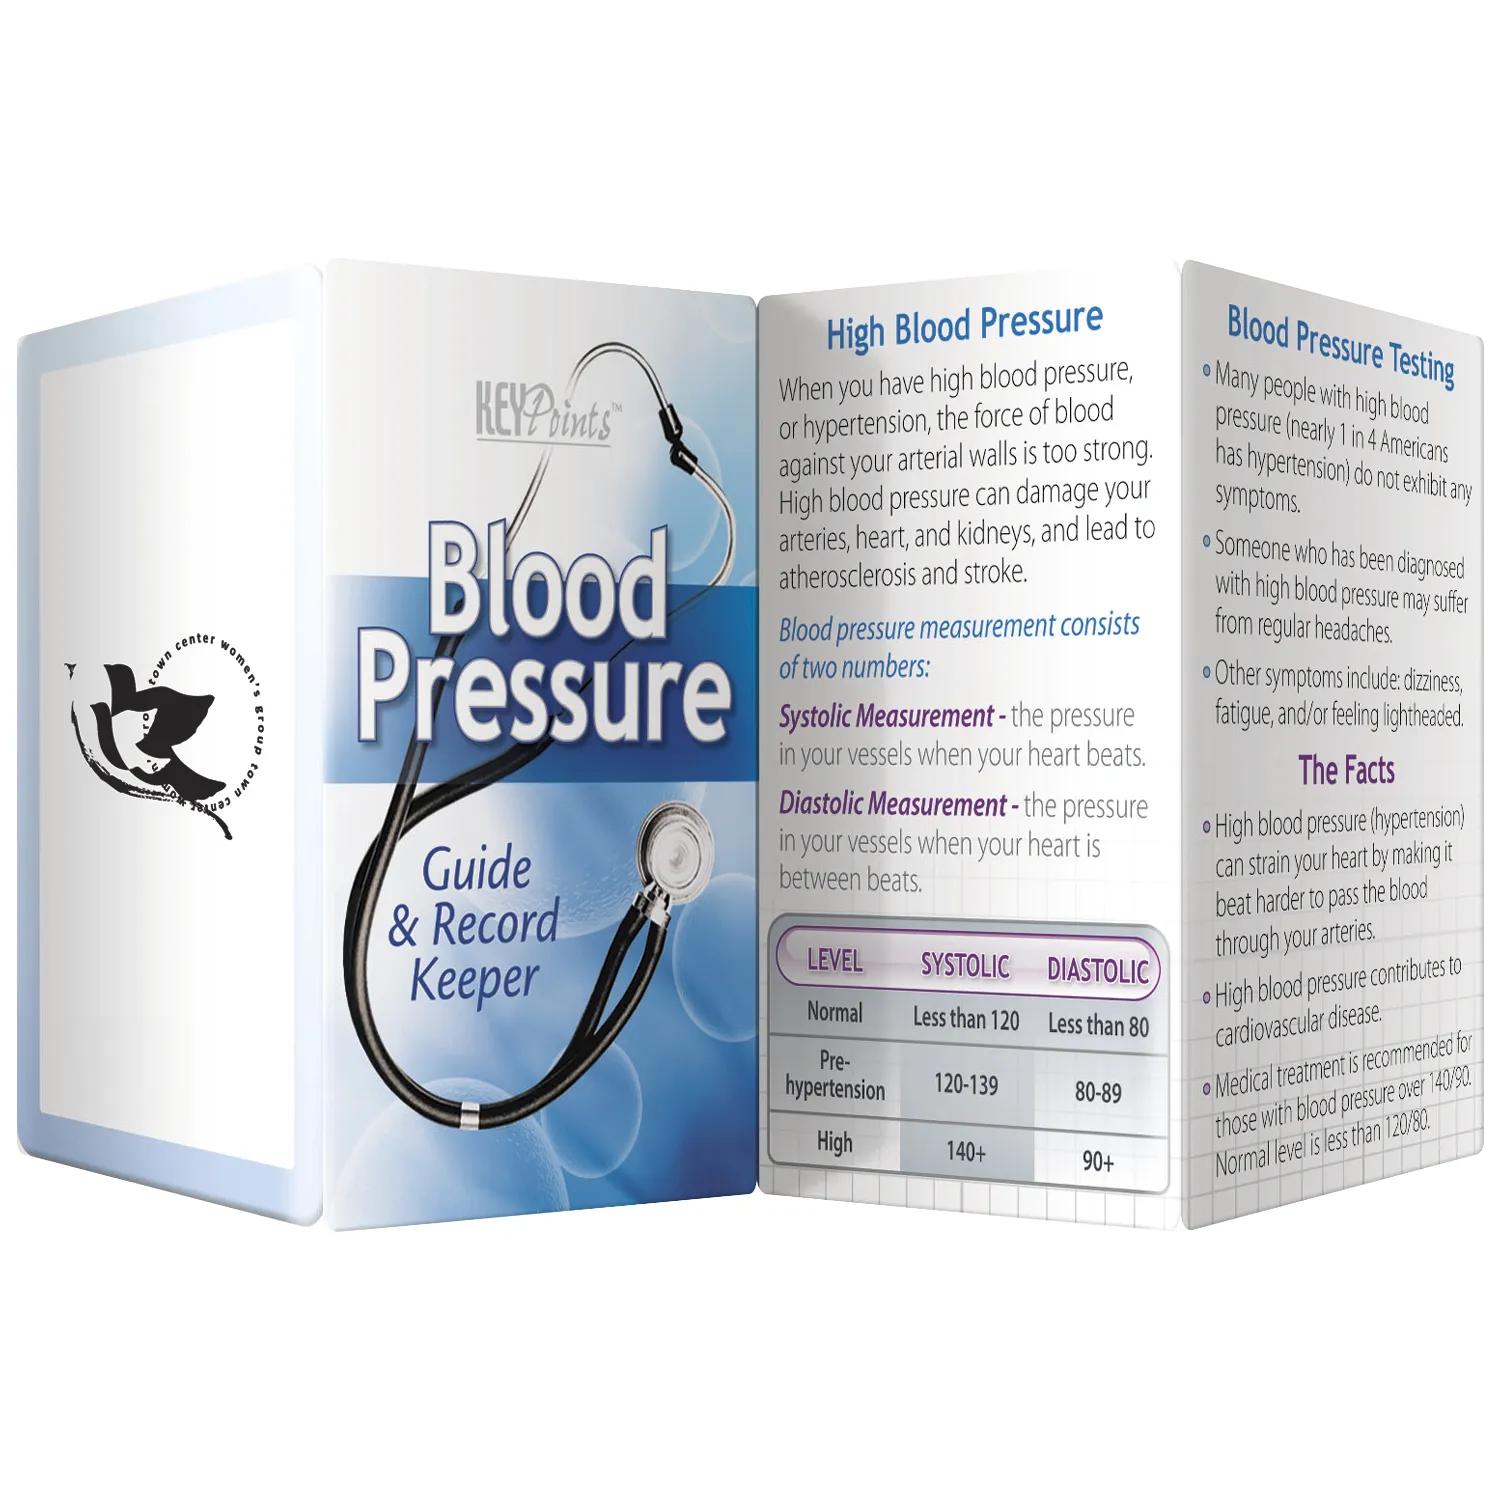 Key Point: Blood Pressure - Guide & Record Keeper 2 of 6